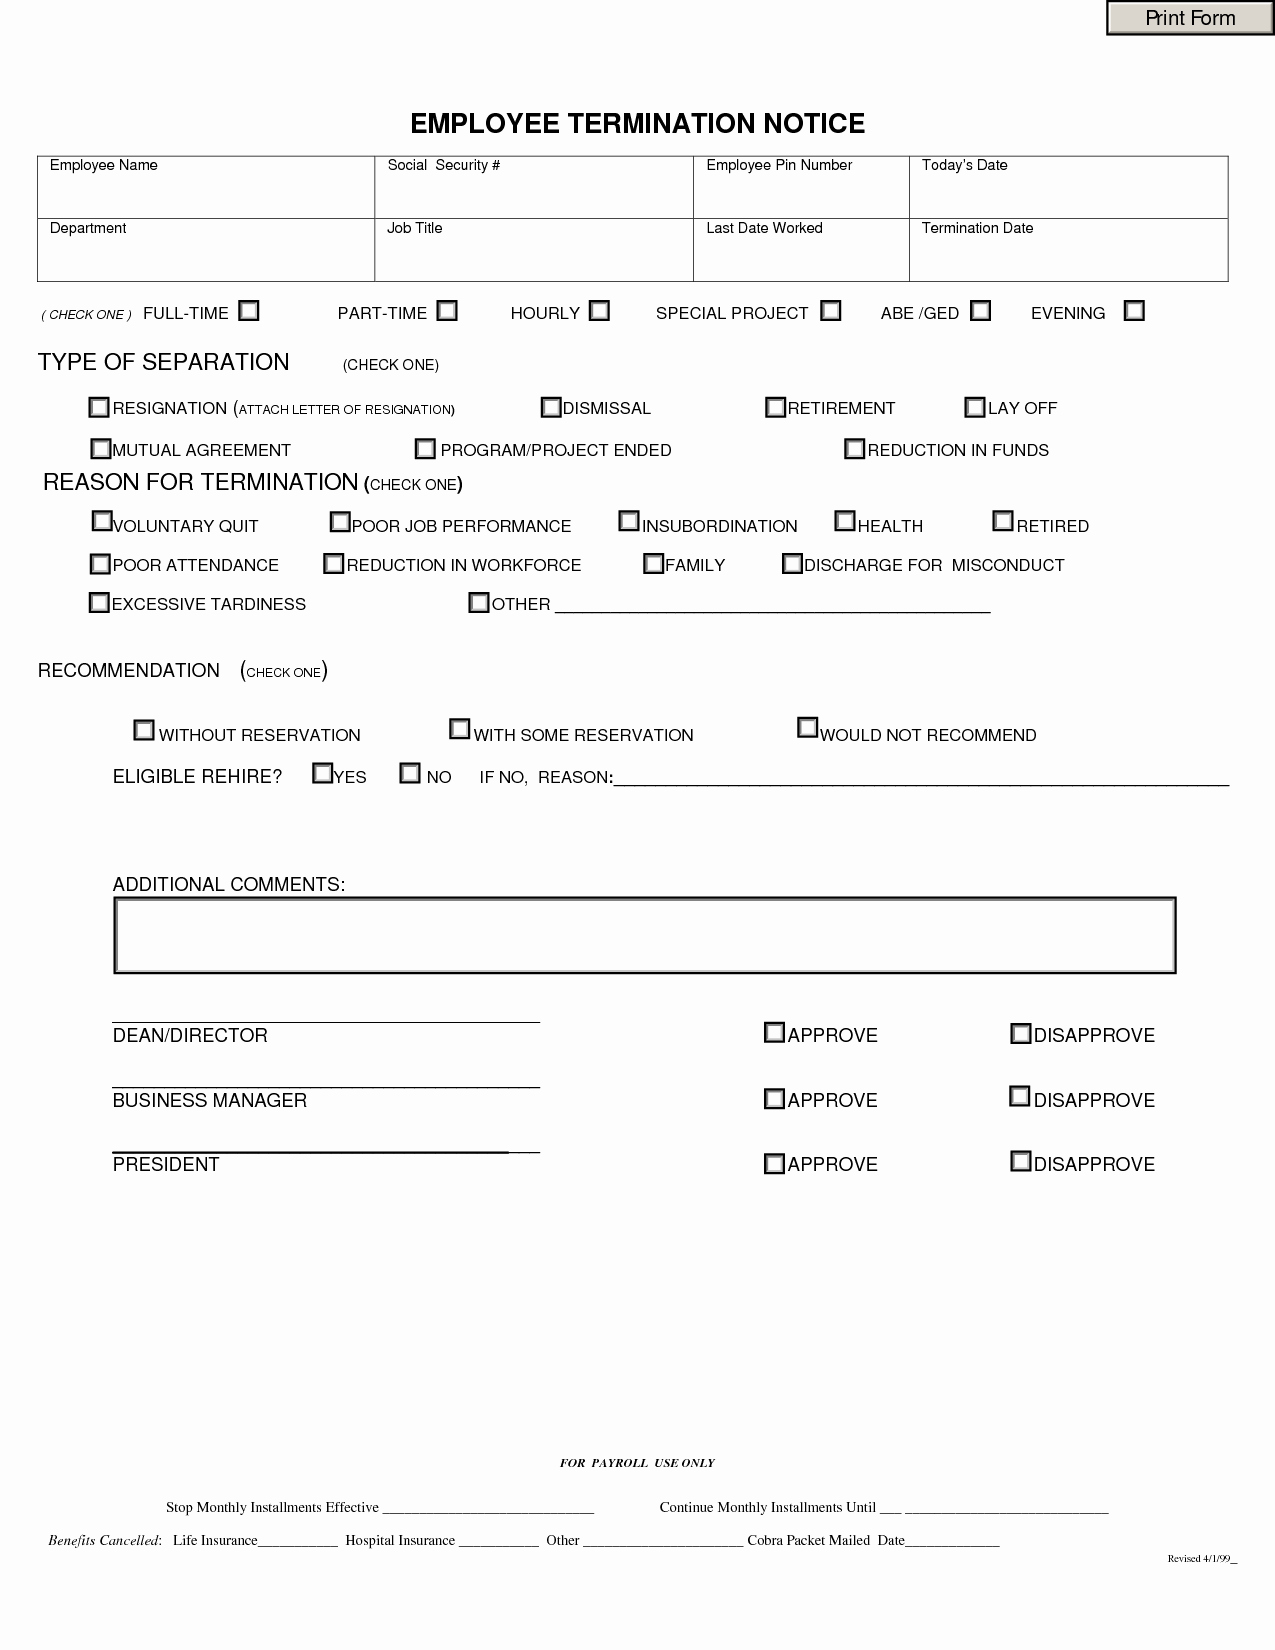 Employee Separation form Template Fresh Separation Notice Template – Printable Year Calendar